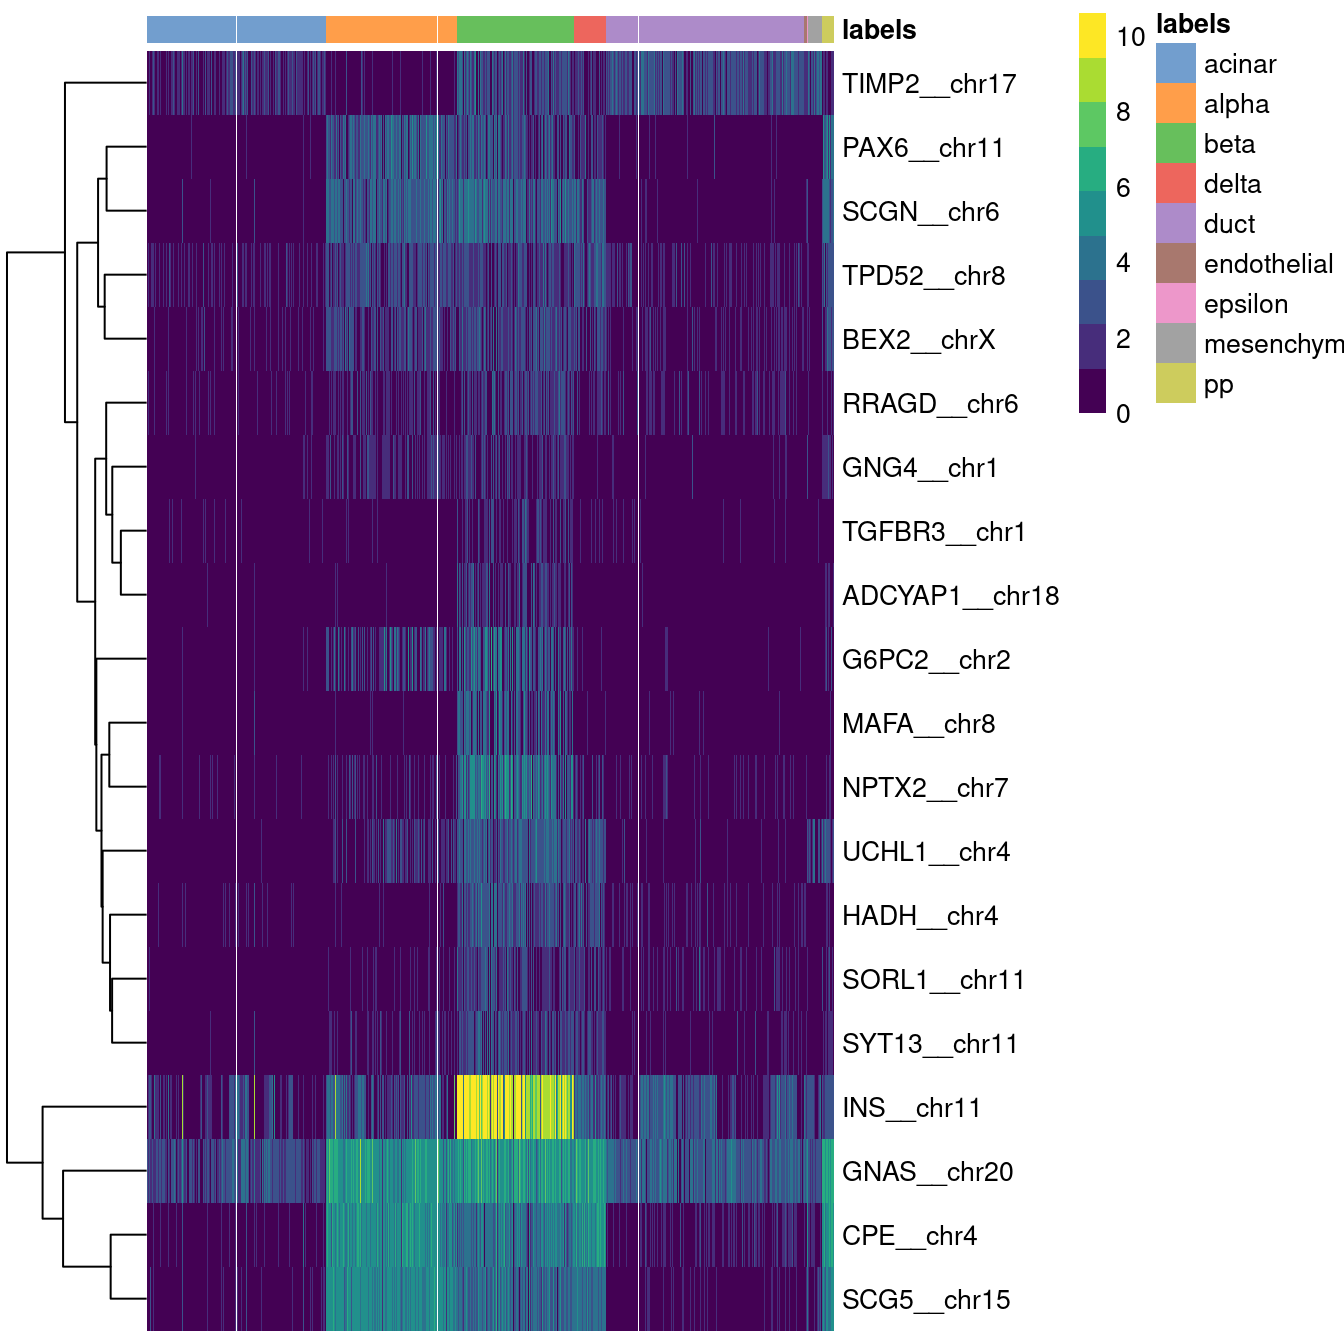 Heatmap of log-expression values in the Grun dataset for all marker genes upregulated in beta cells in the Muraro reference dataset, pruned to those that are also upregulated in the assigned cells in the Grun dataset. Assigned labels for each cell are shown at the top of the plot.